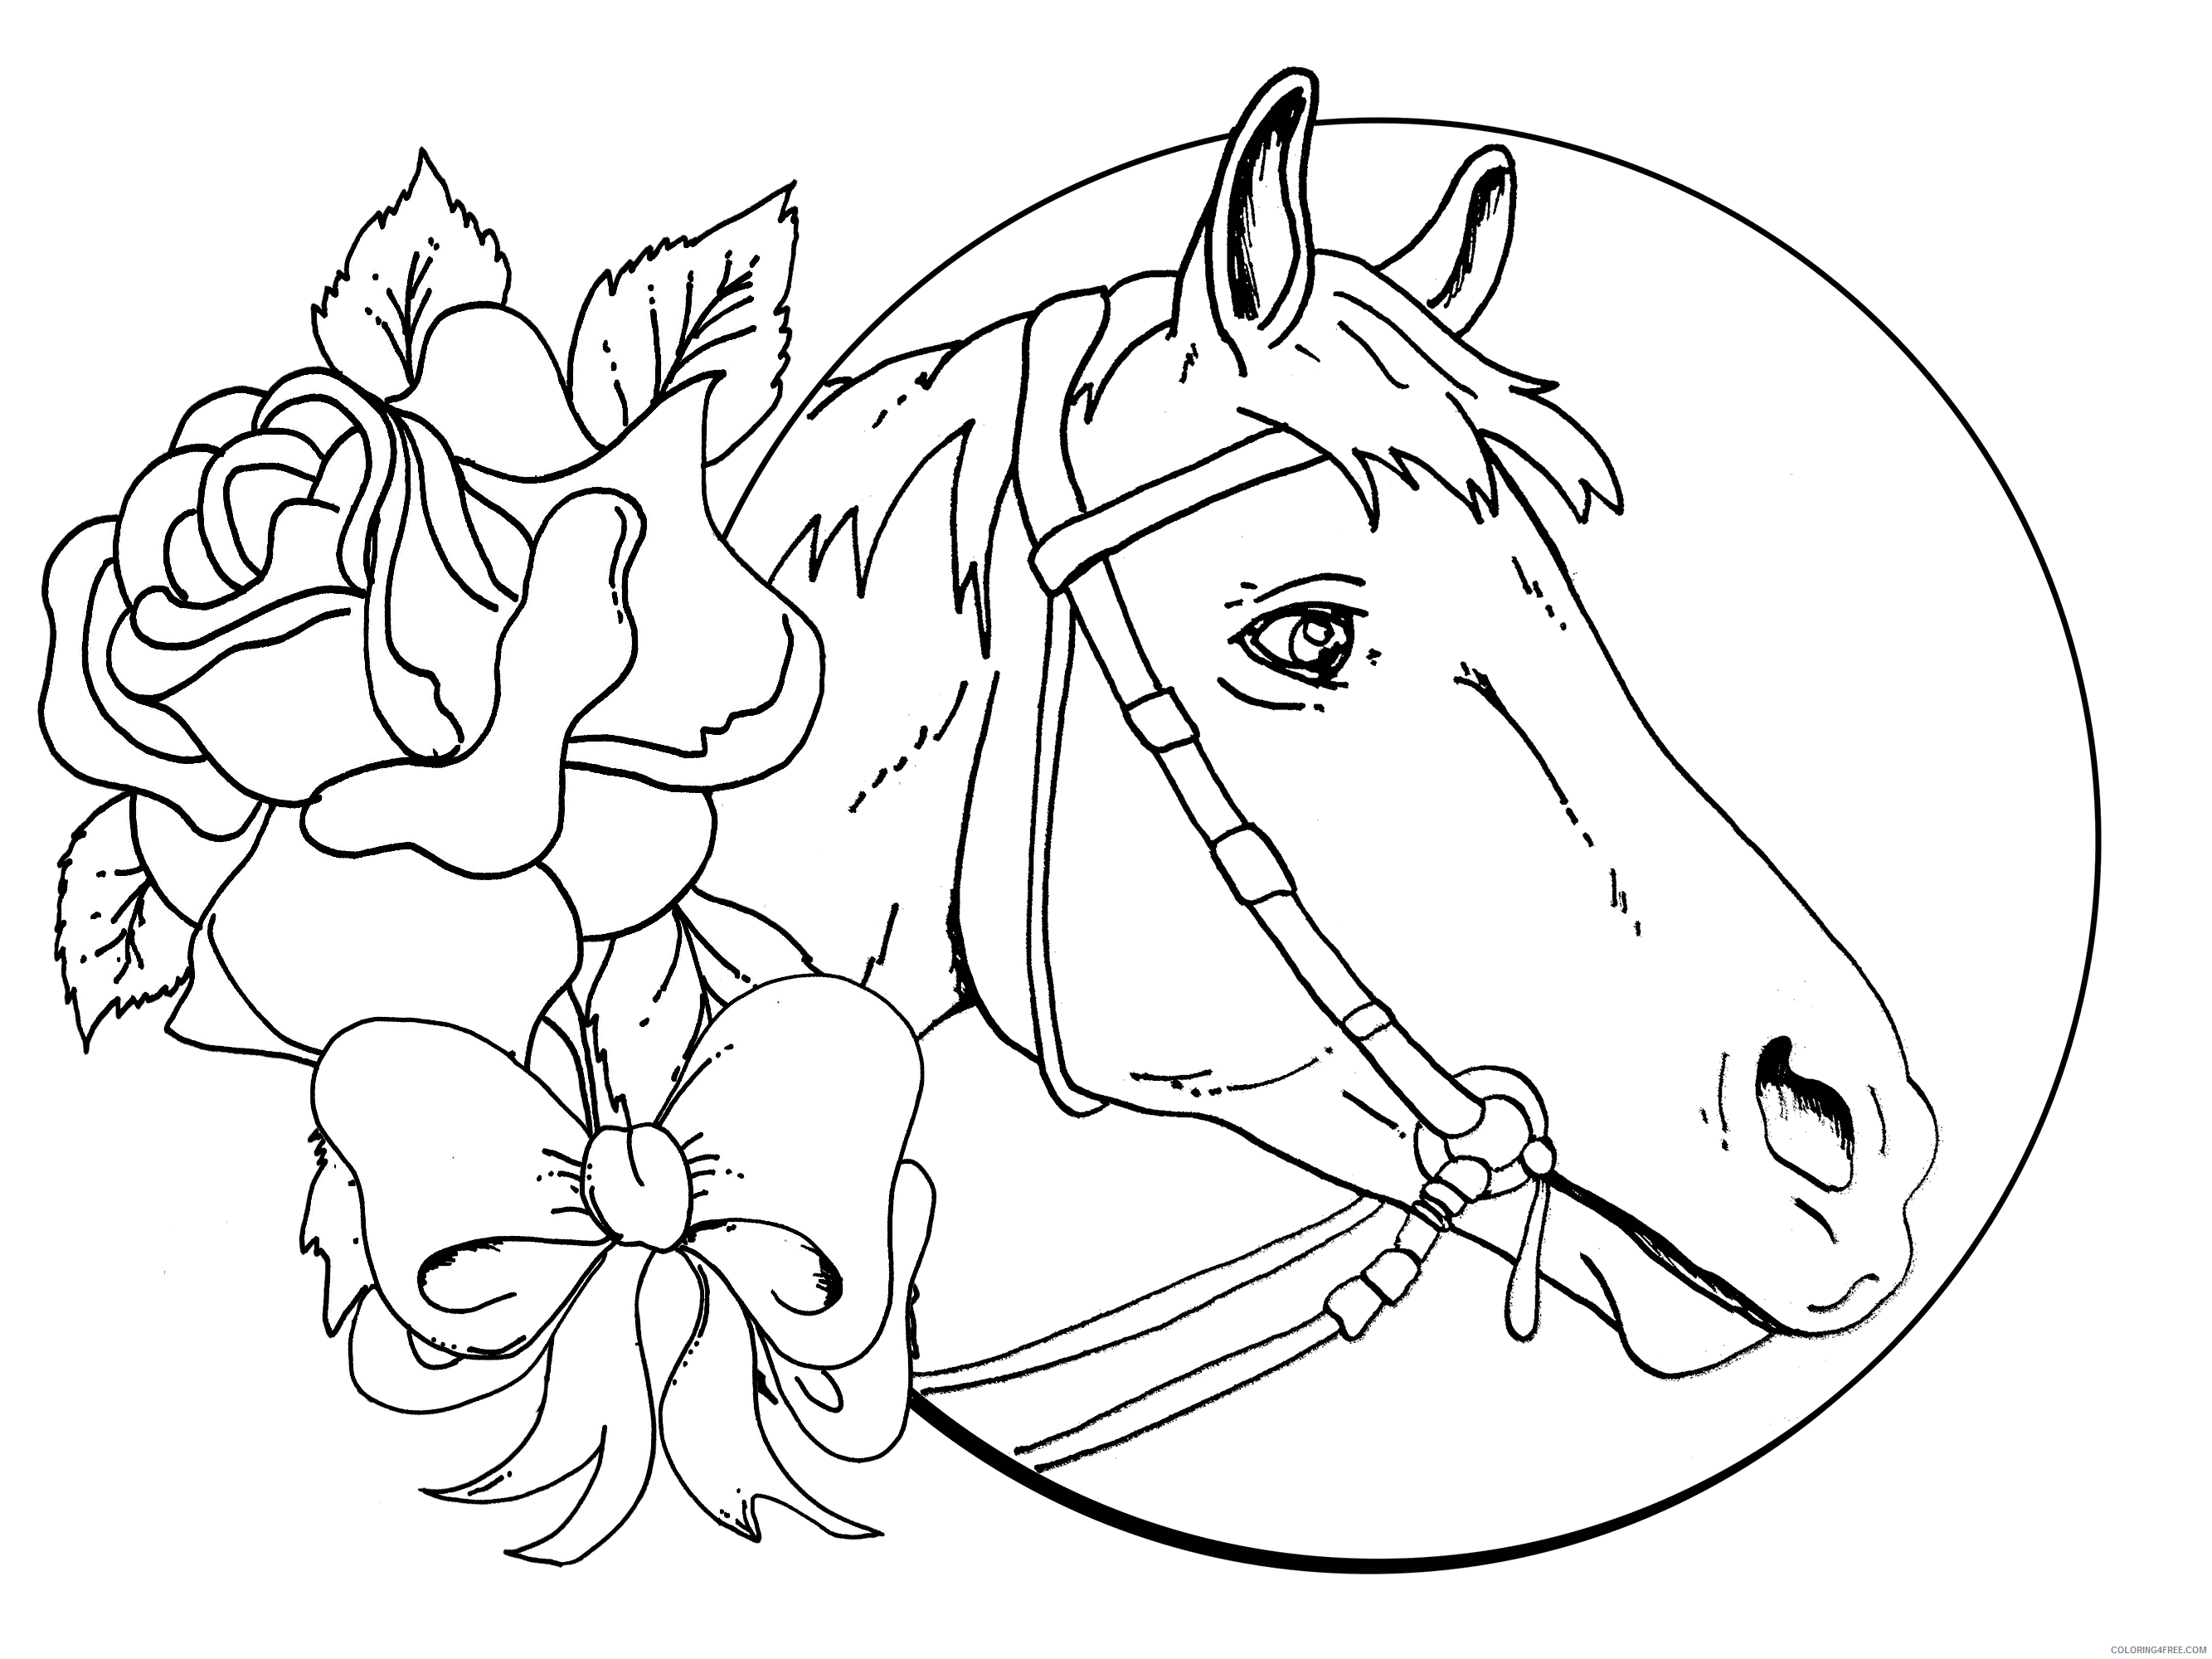 Horses Coloring Pages Animal Printable Sheets free horse online craft cute 2021 Coloring4free